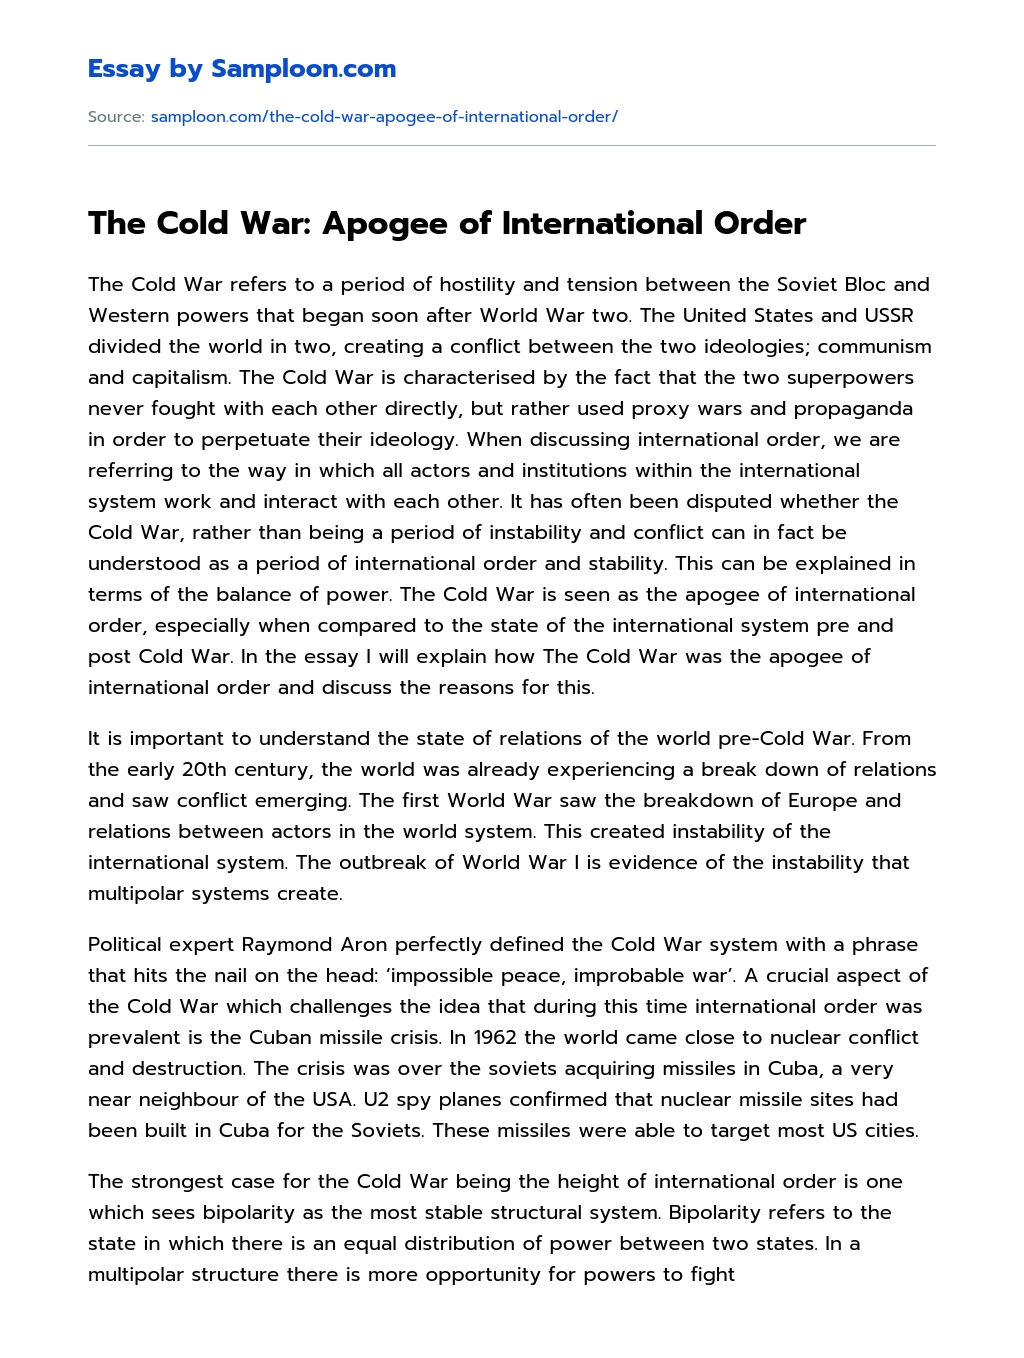 The Cold War: Apogee of International Order essay